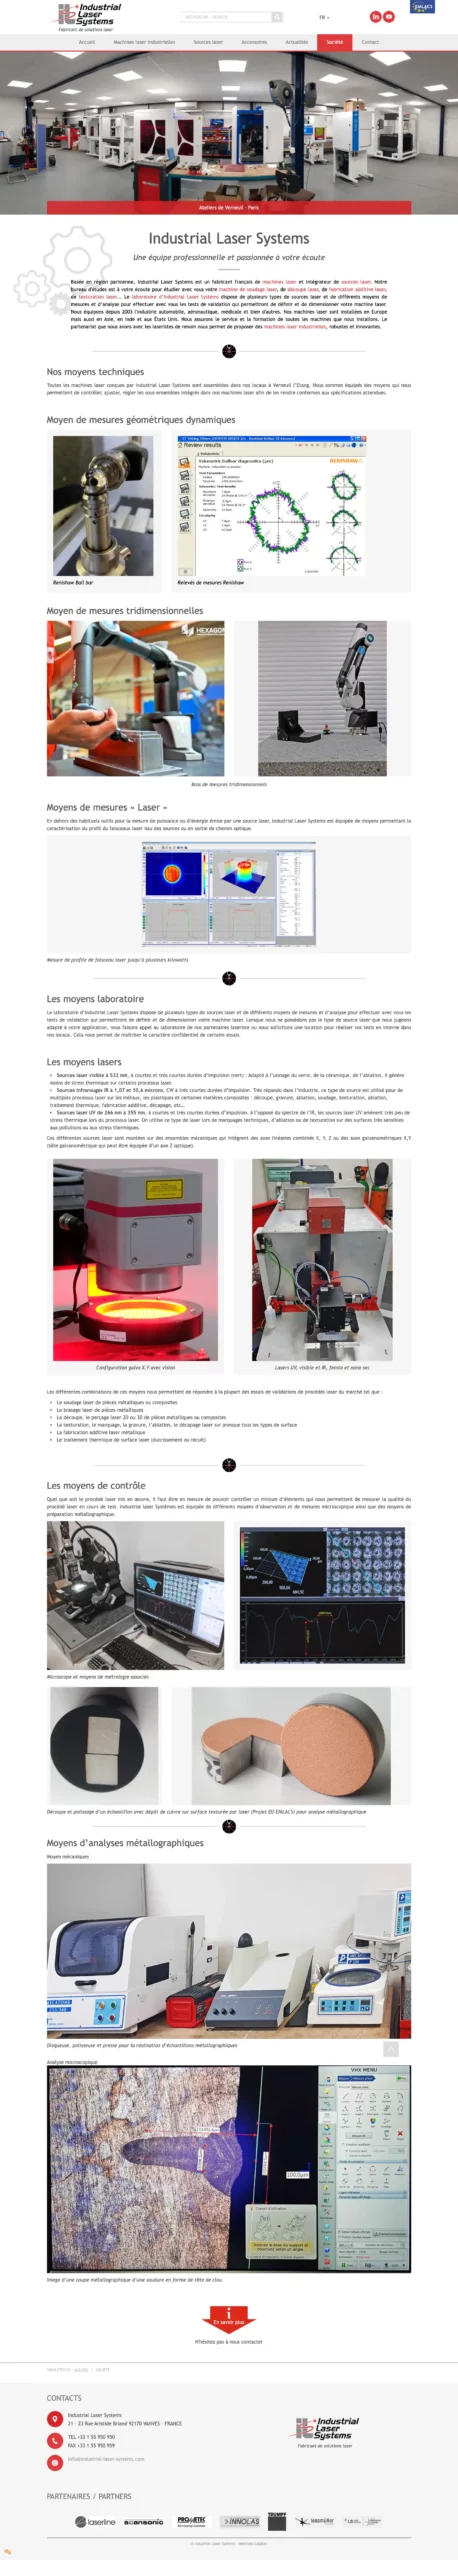 ILS-industrial-laser-systems